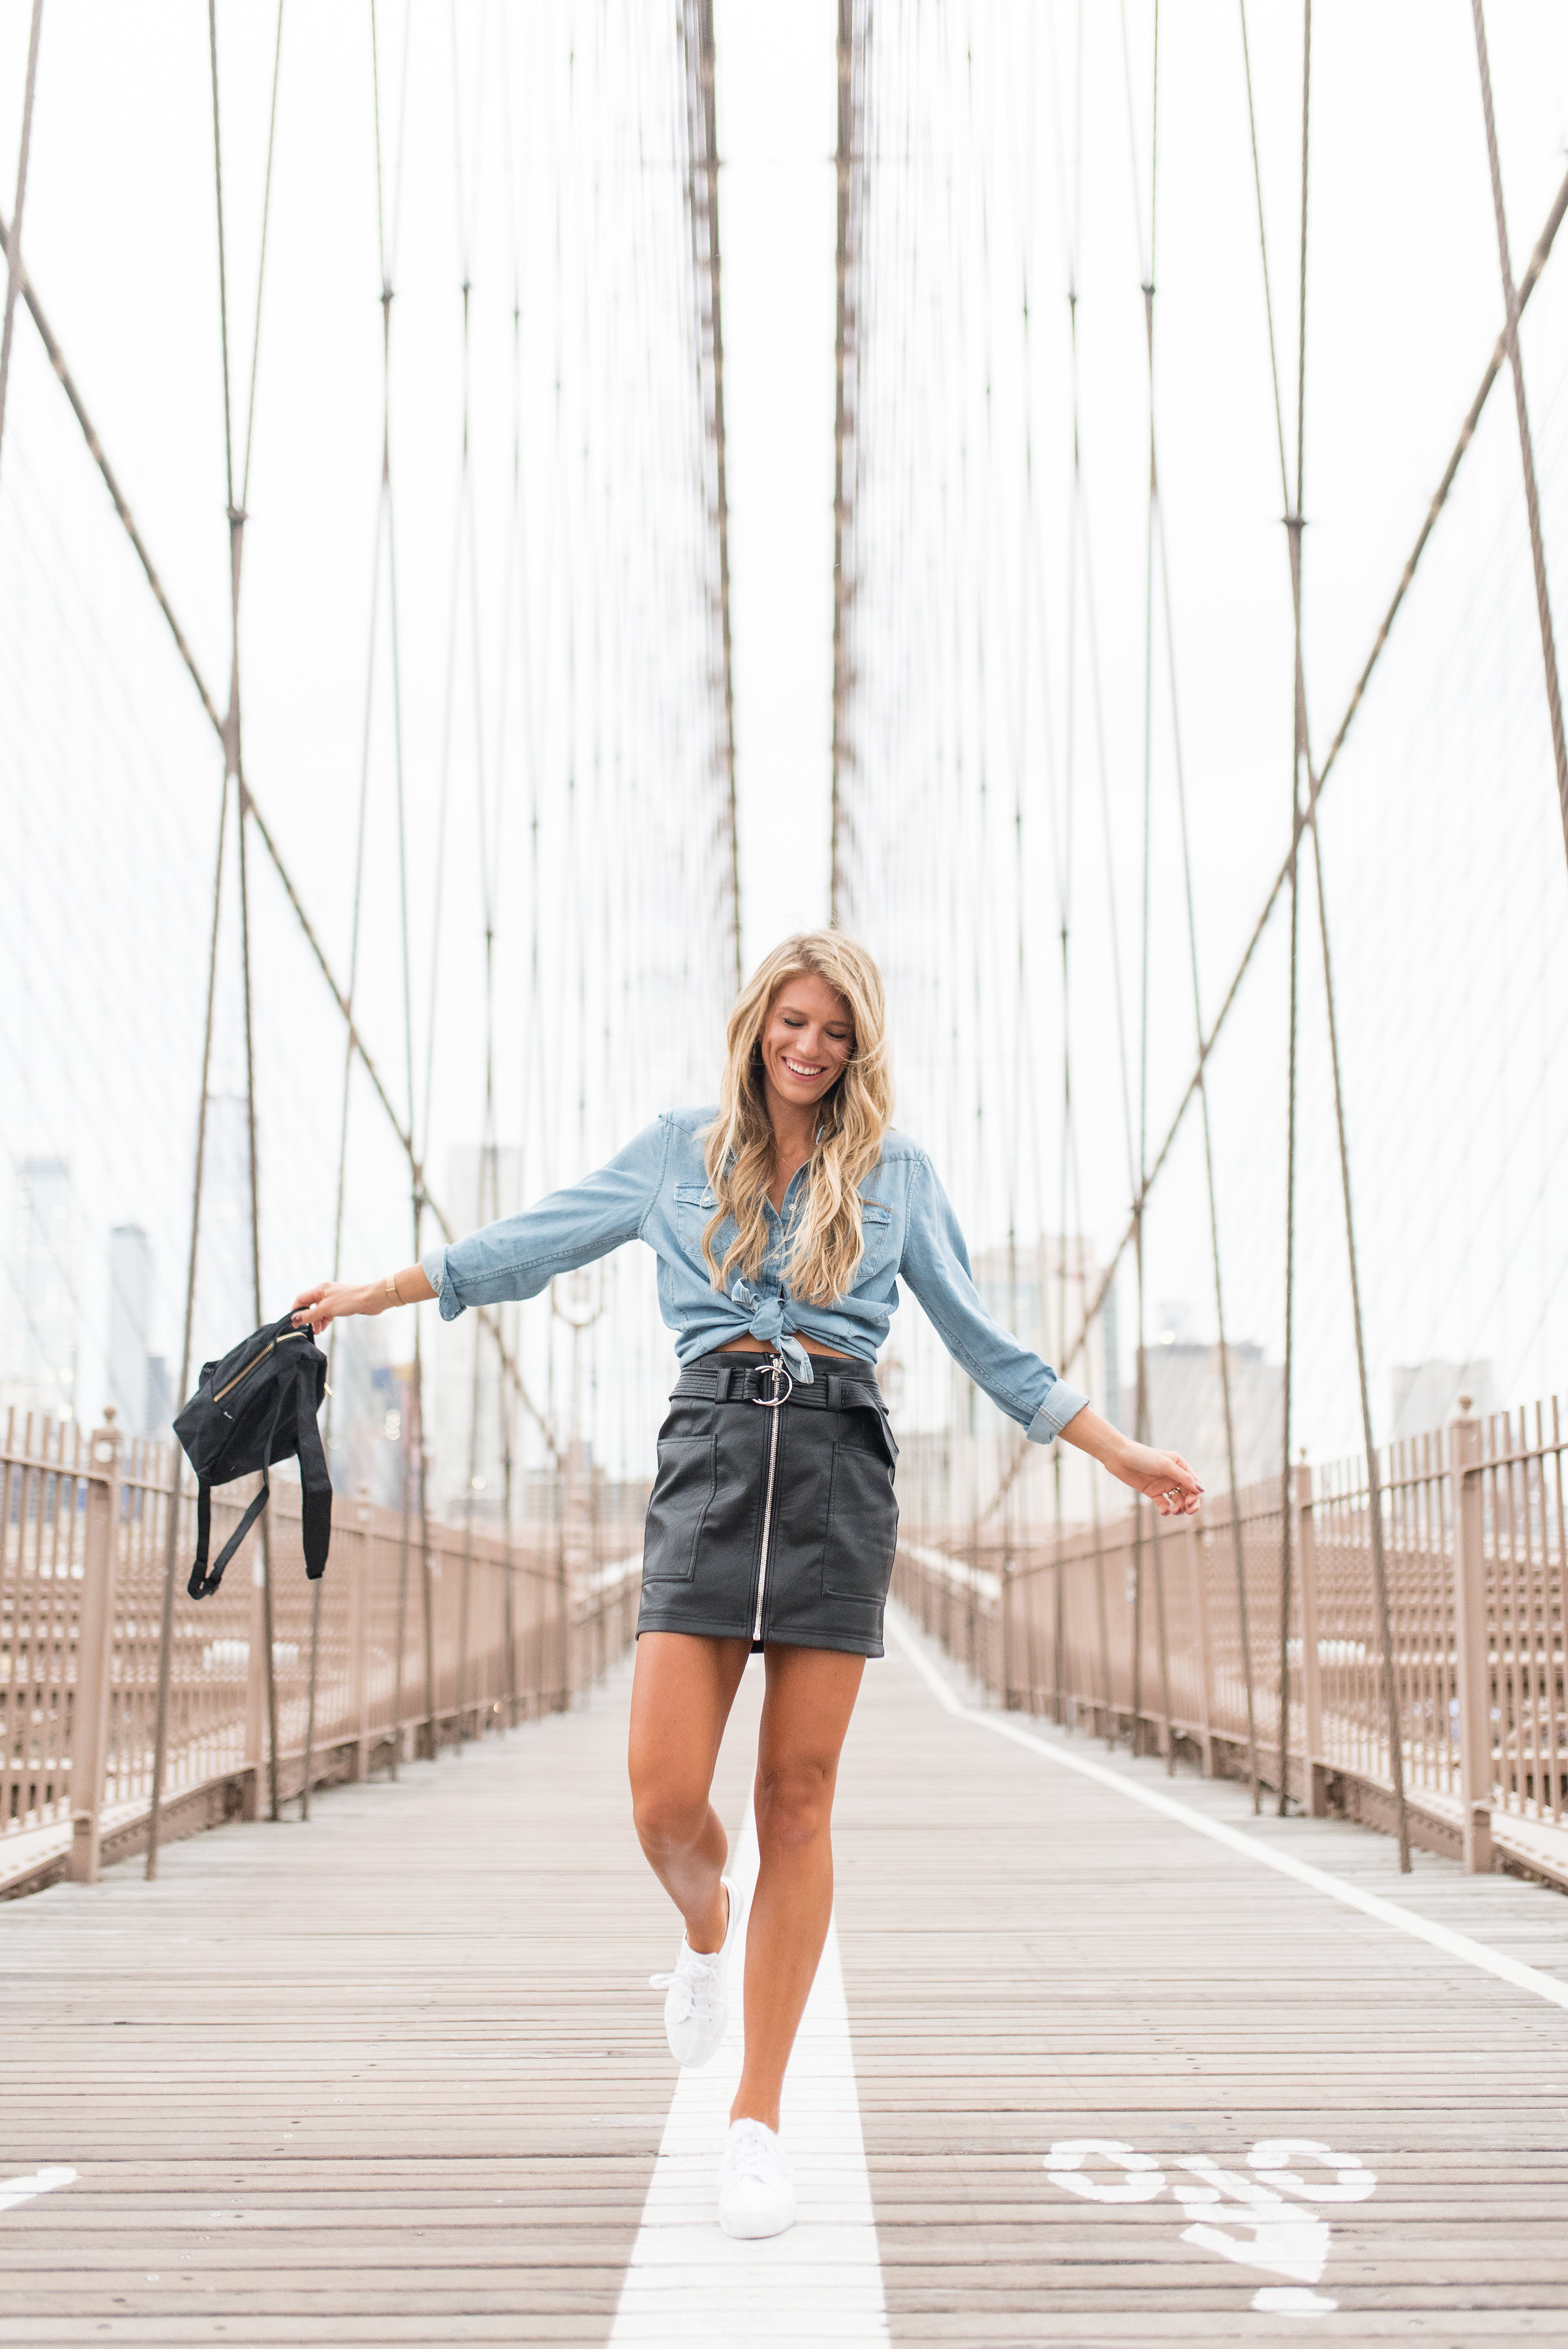 My First NYFW as a lifestyle and fashion blogger Ashley Bell Tallblondebell : Brooklyn Bridge